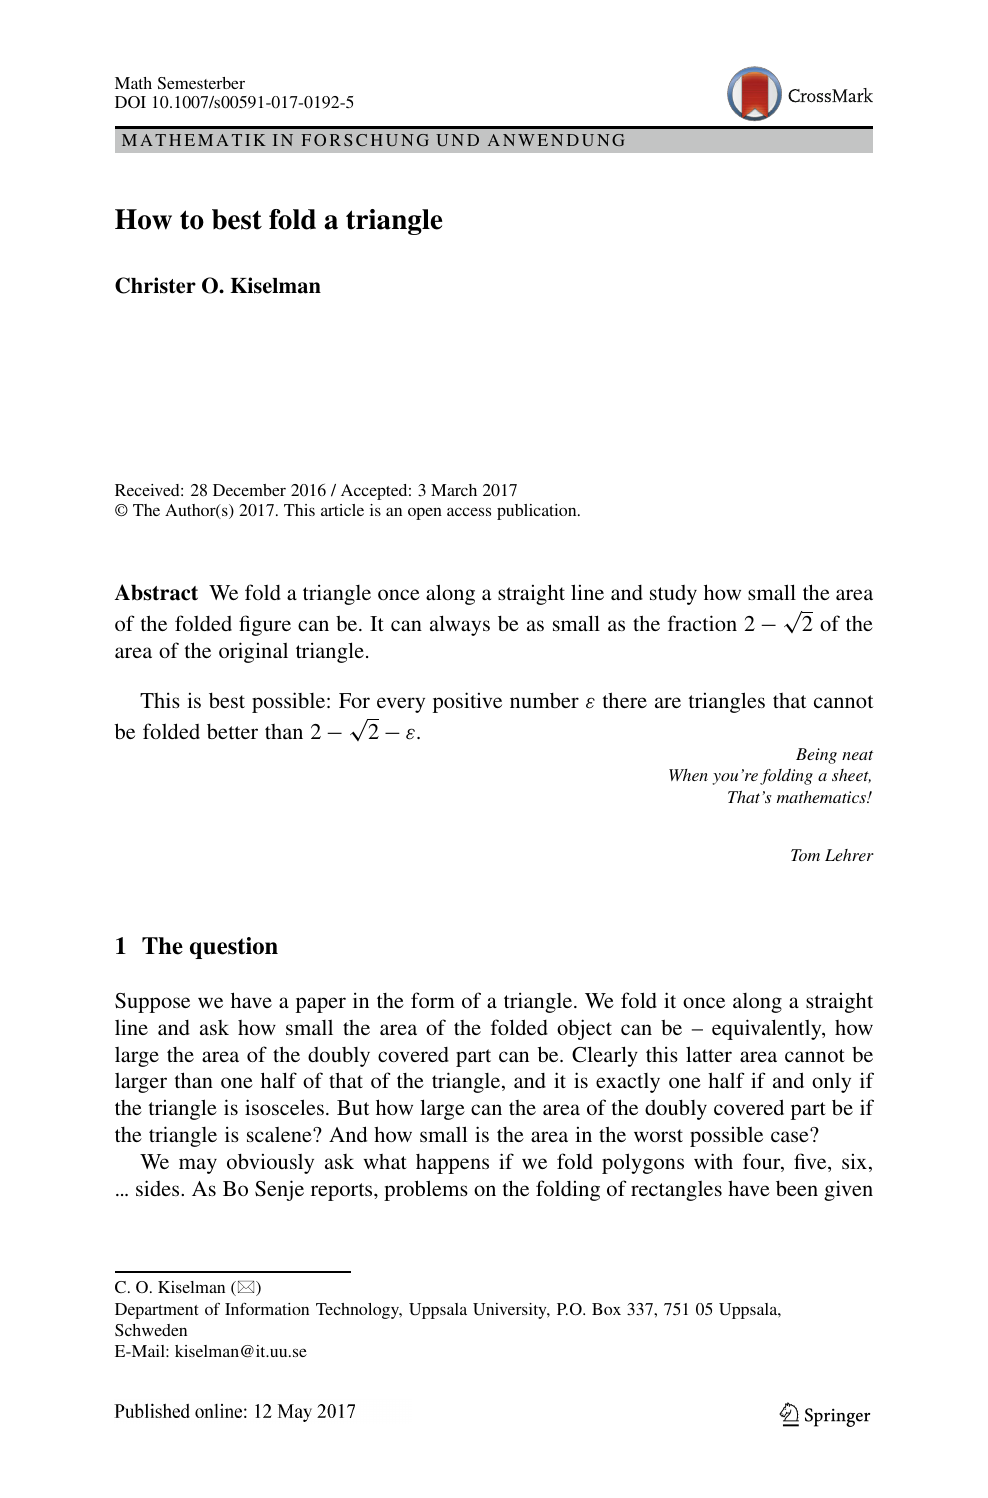 How To Best Fold A Triangle Topic Of Research Paper In Mathematics Download Scholarly Article Pdf And Read For Free On Cyberleninka Open Science Hub